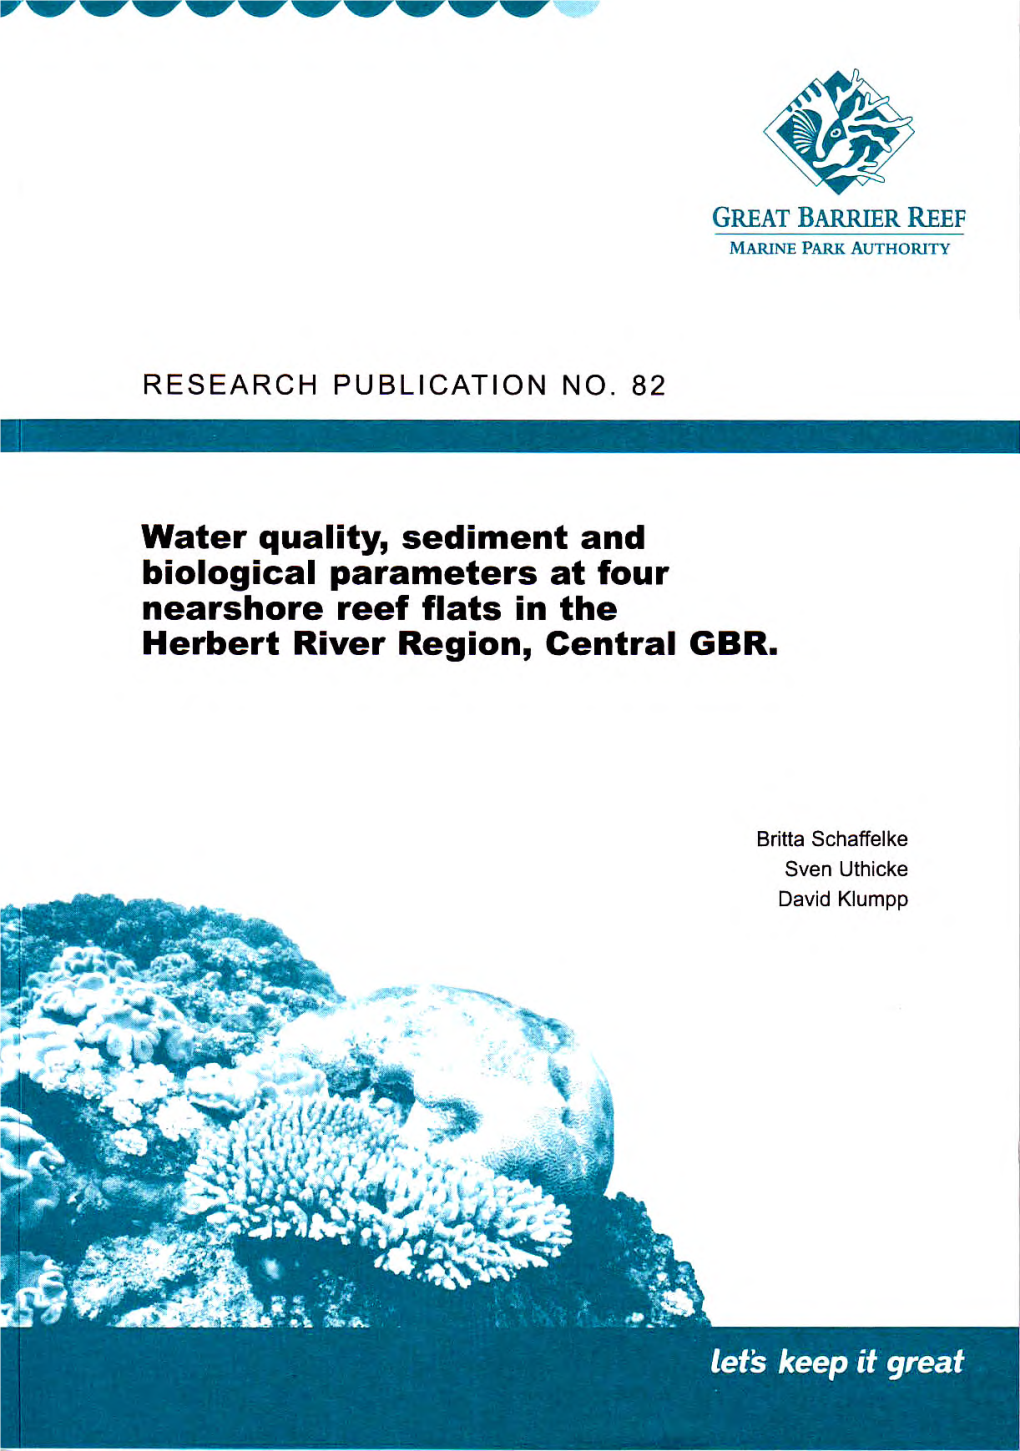 Water Quality, Sediment and Biological Parameters at Four Nearshore Reef Flats in the Herbert River Region, Central GBR